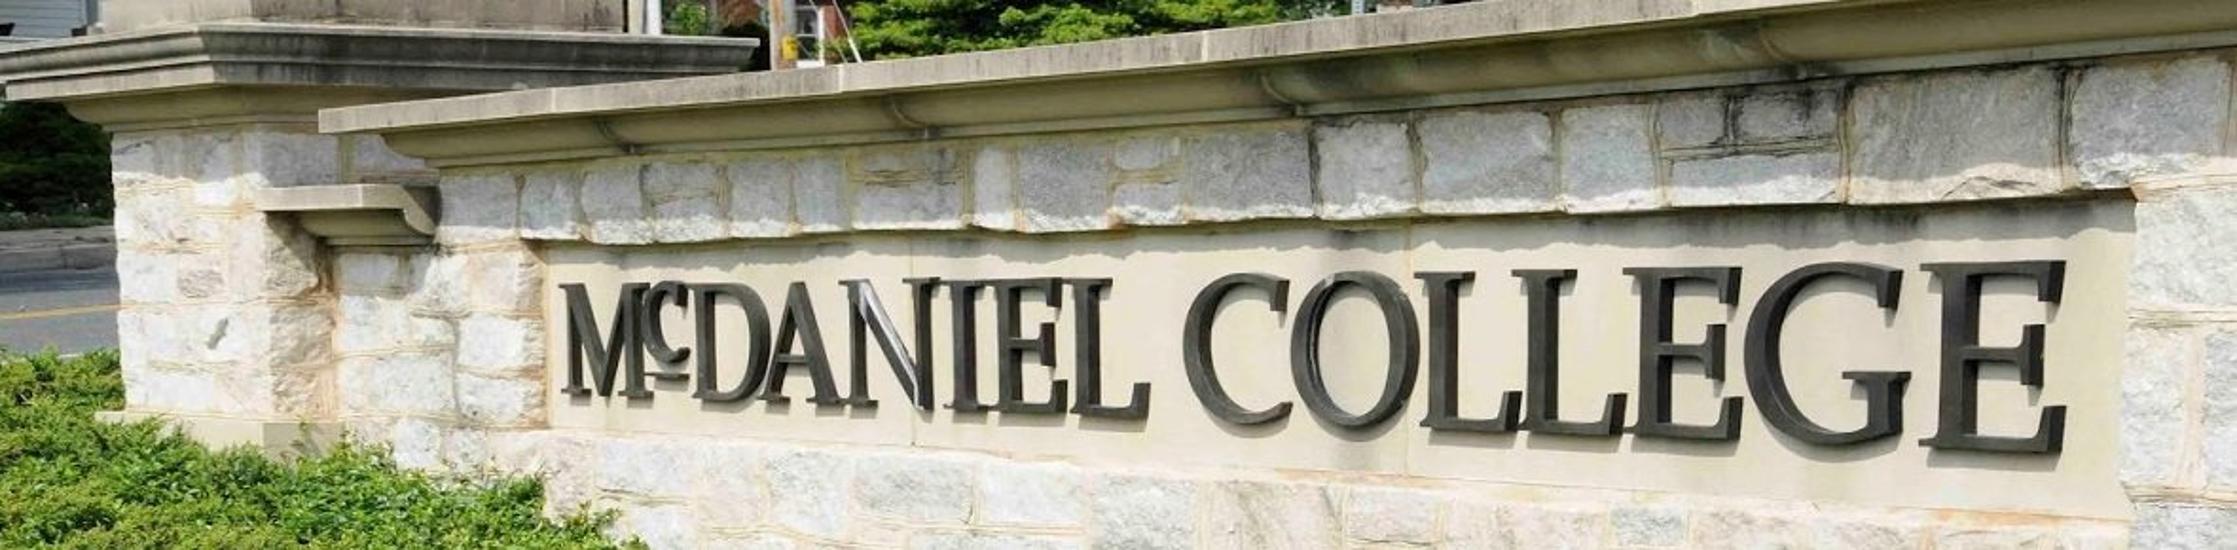 McDaniel College Poised To Be First To Fulfil New Higher-Ed Law Conditions